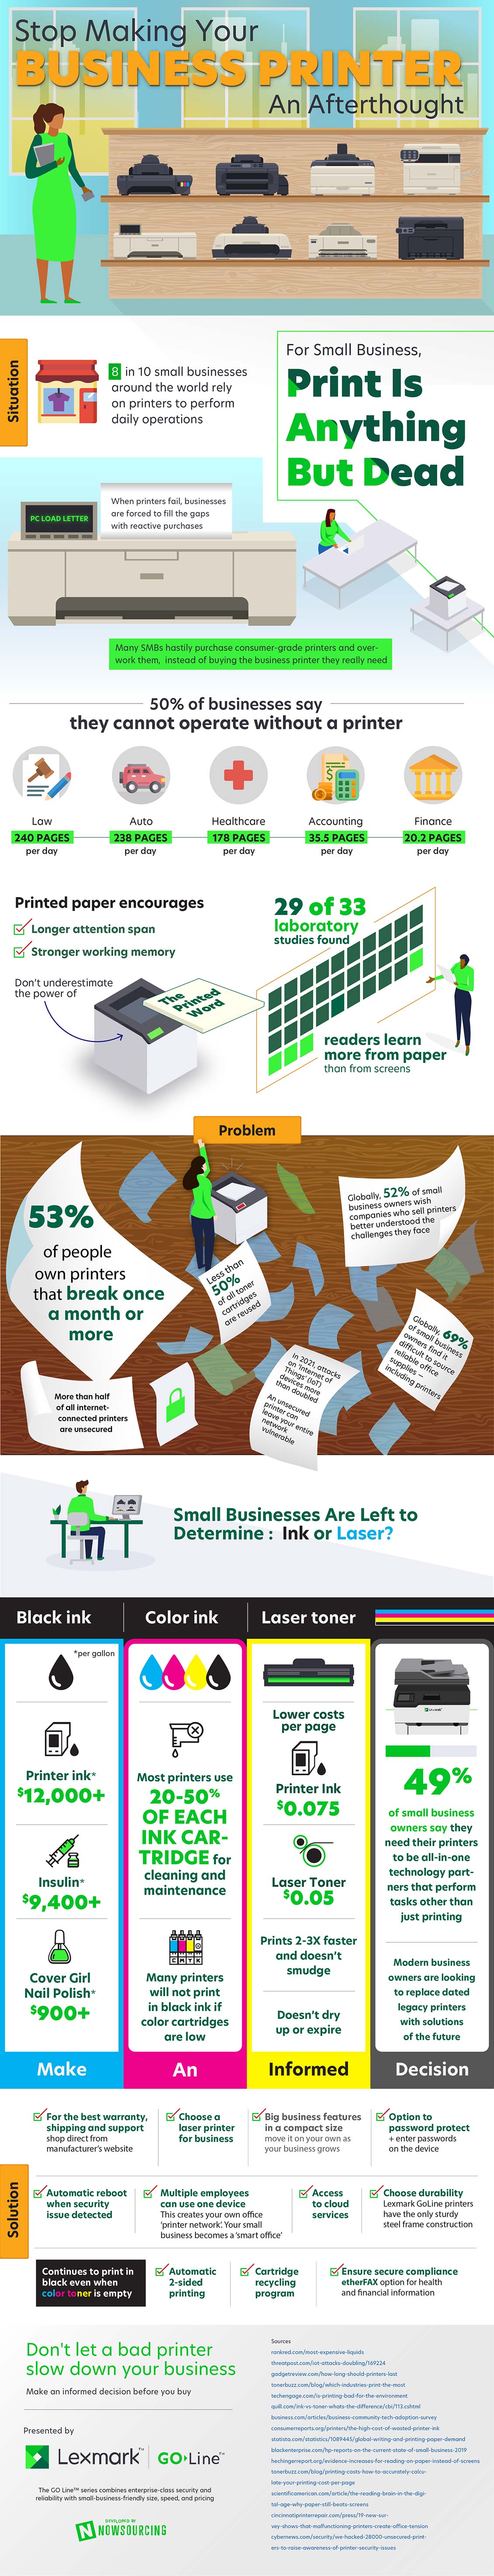 Lexmark best small business printer infographic